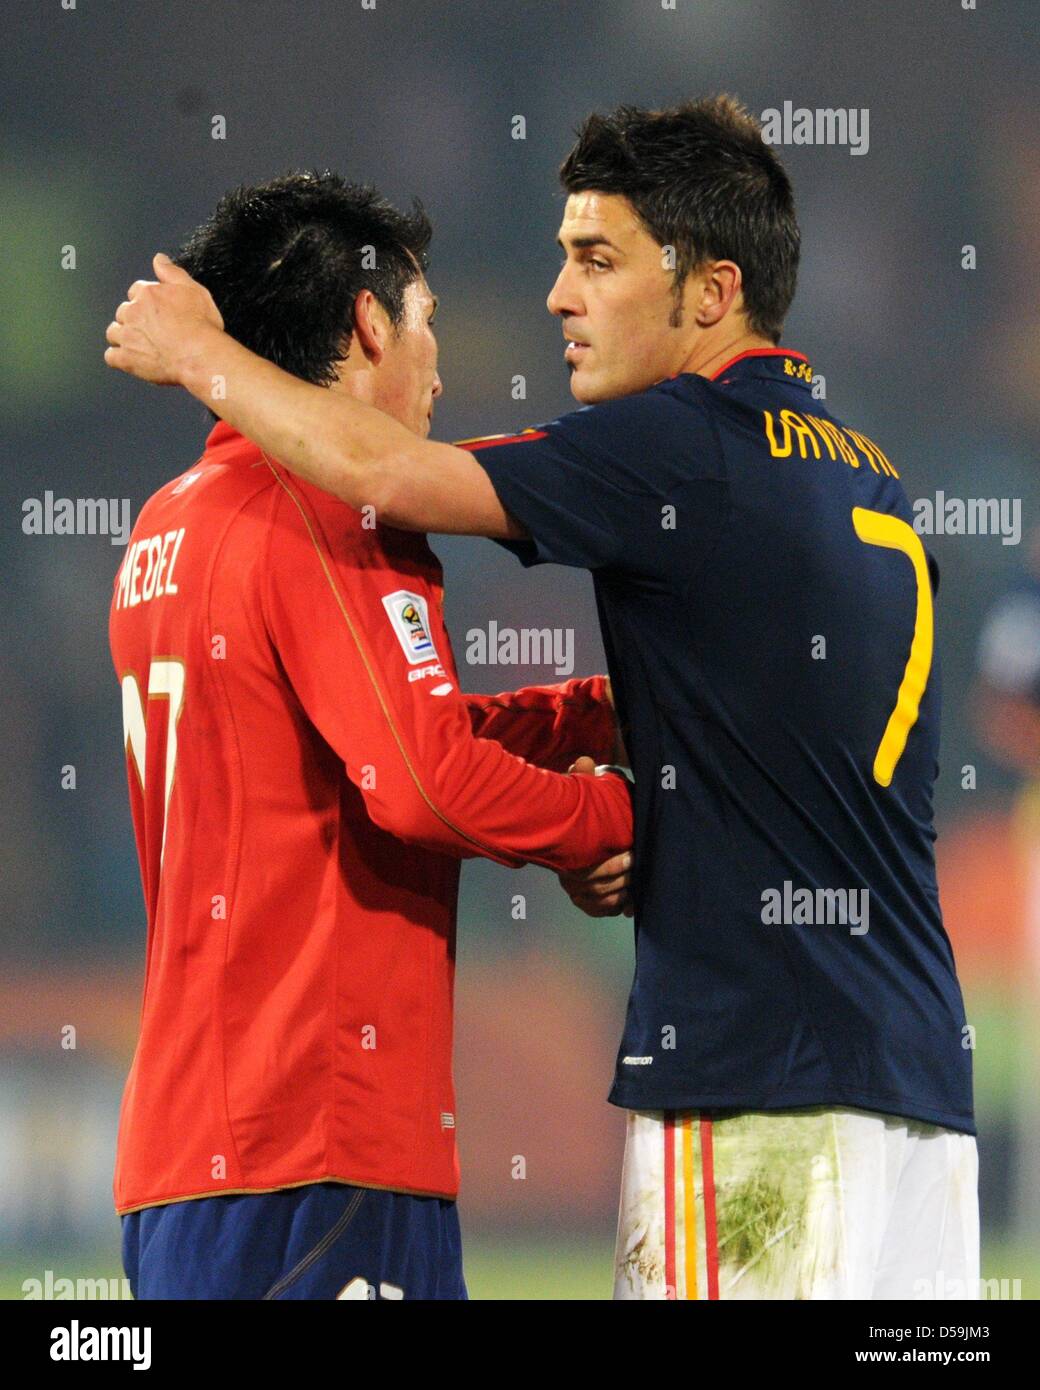 David Villa (R) of Spain and Gary Medel of Chile shake hands after the FIFA World Cup 2010 group H match between Chile and Spain at the Loftus Versfeld Stadium in Pretoria, South Africa 25 June 2010. Photo: Bernd Weissbrod dpa - Please refer to http://dpaq.de/FIFA-WM2010-TC Stock Photo